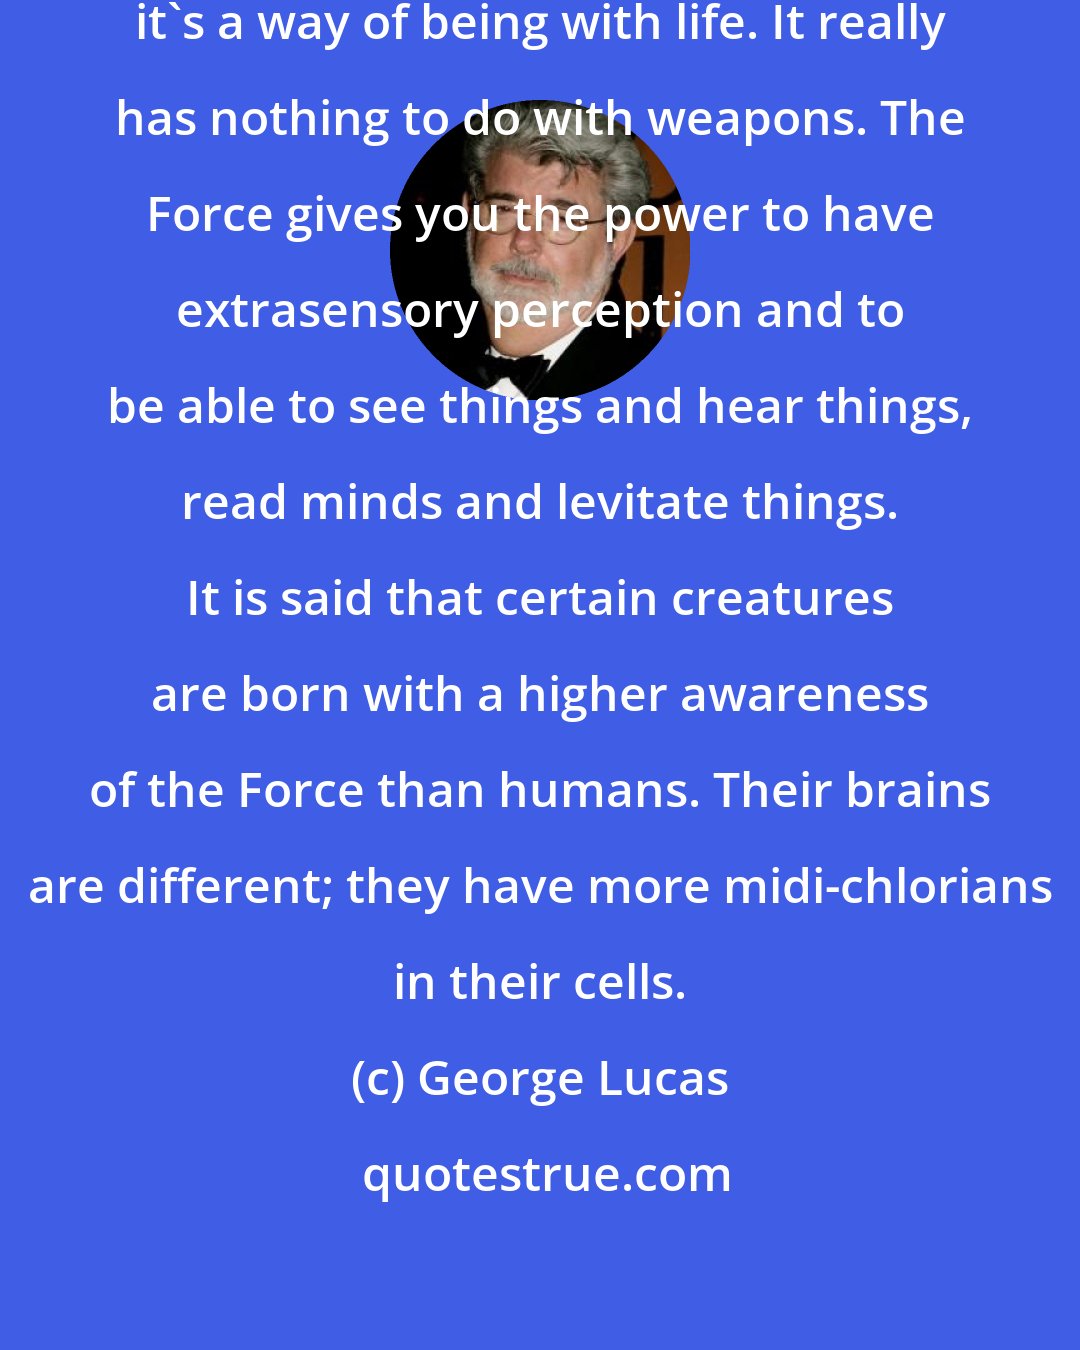 George Lucas: The Force is really a way of feeling; it's a way of being with life. It really has nothing to do with weapons. The Force gives you the power to have extrasensory perception and to be able to see things and hear things, read minds and levitate things. It is said that certain creatures are born with a higher awareness of the Force than humans. Their brains are different; they have more midi-chlorians in their cells.